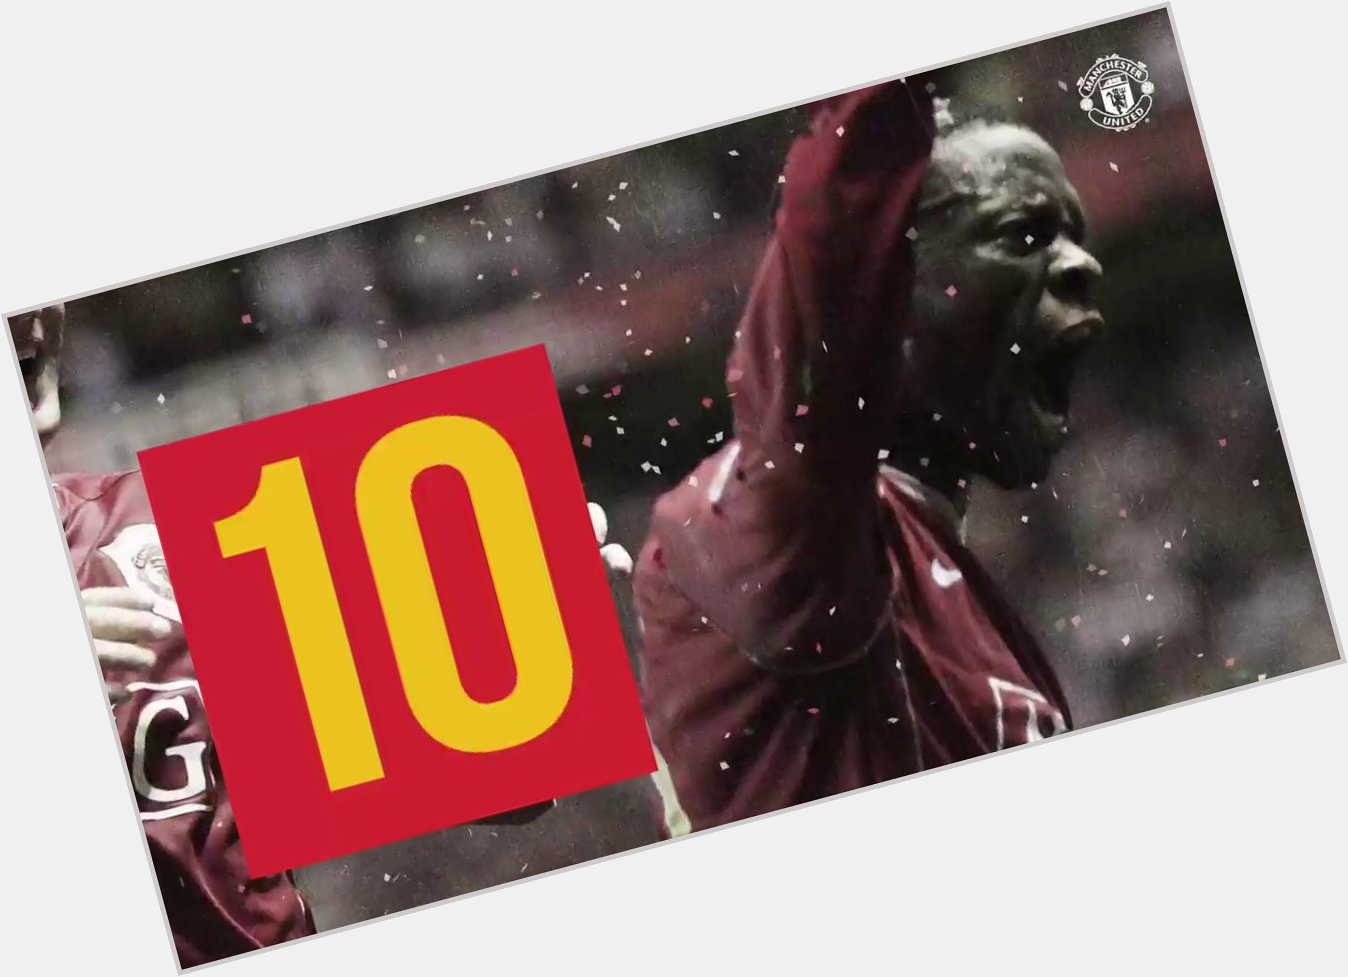 Happy birthday to Louis Saha, who turns 44 today. Sit back and enjoy his top 10 goals at Manchester United. 